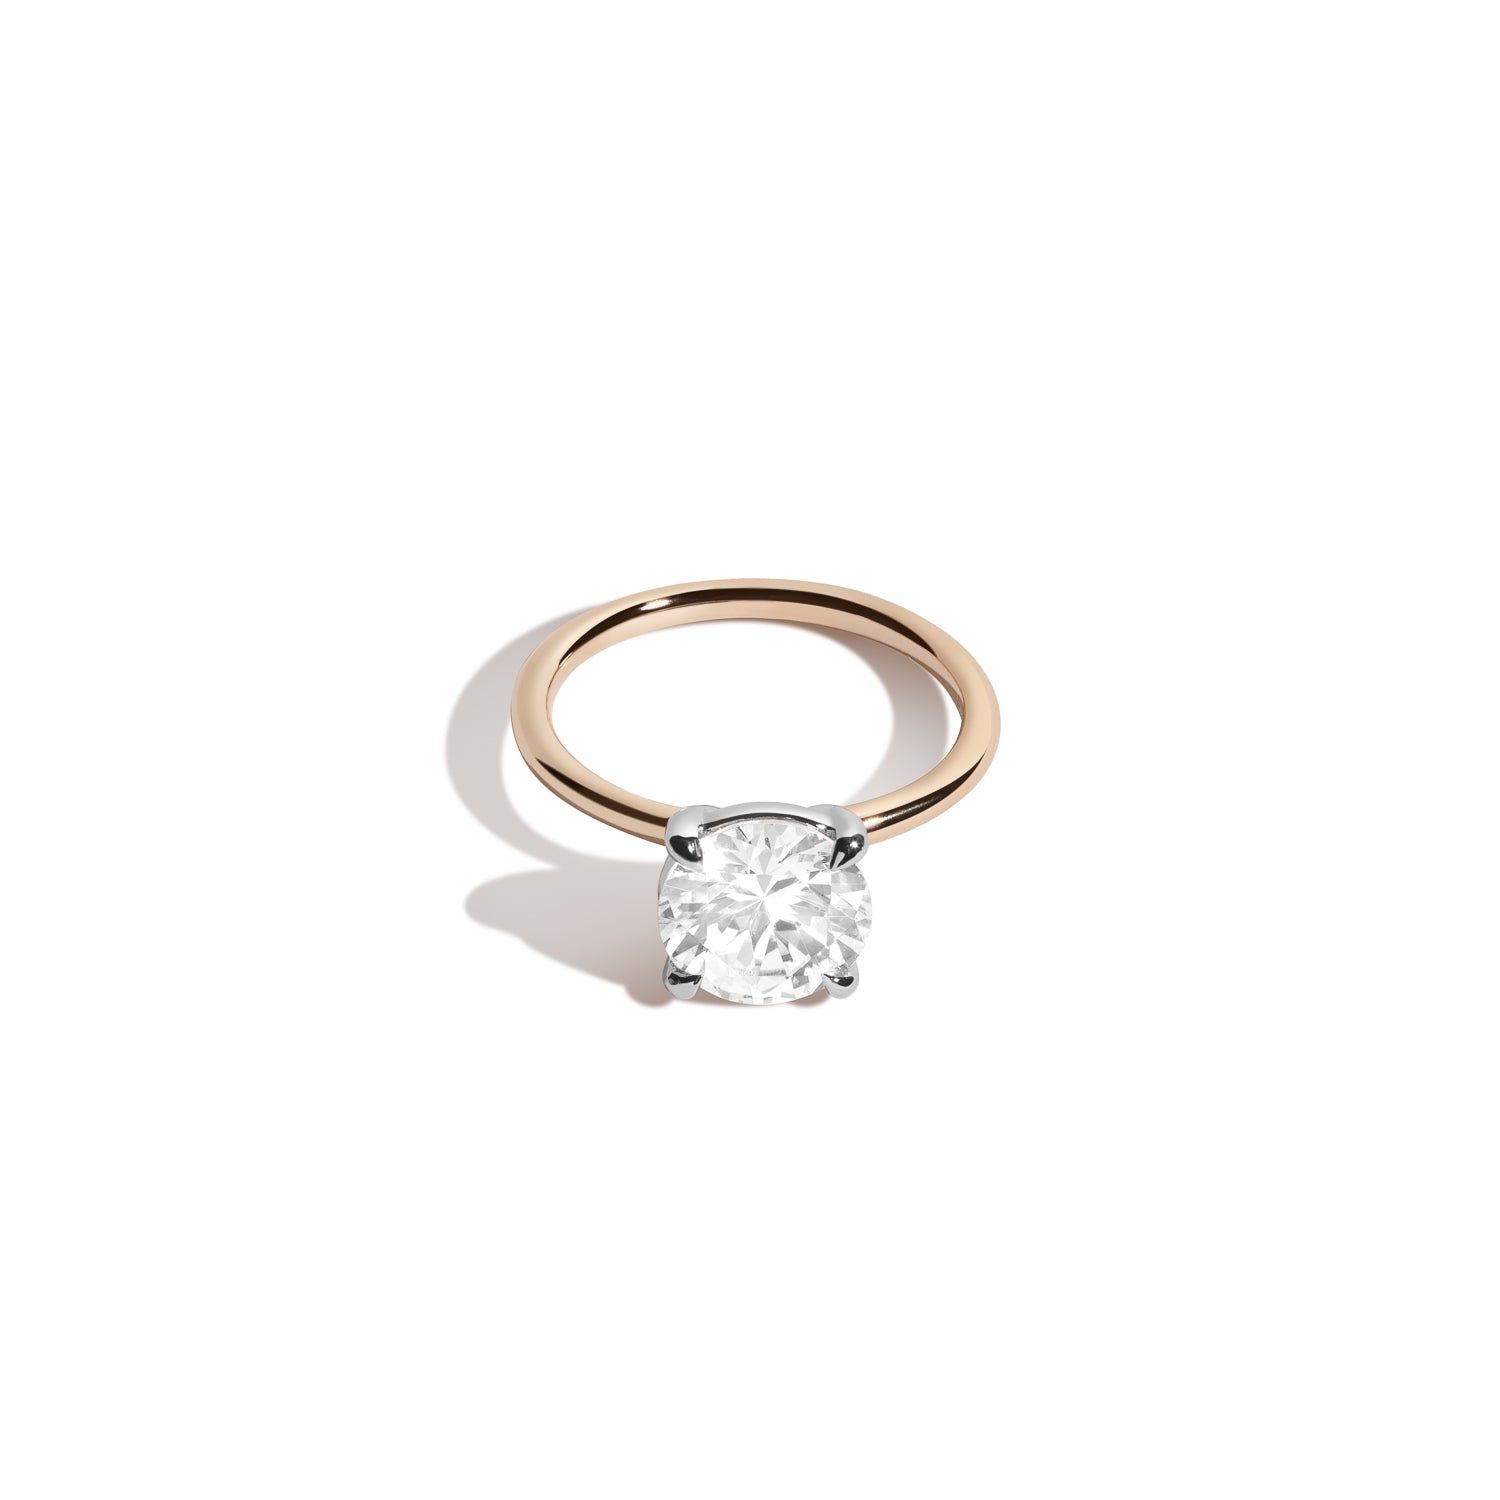 Shahla Karimi Brilliant Barely There Ring